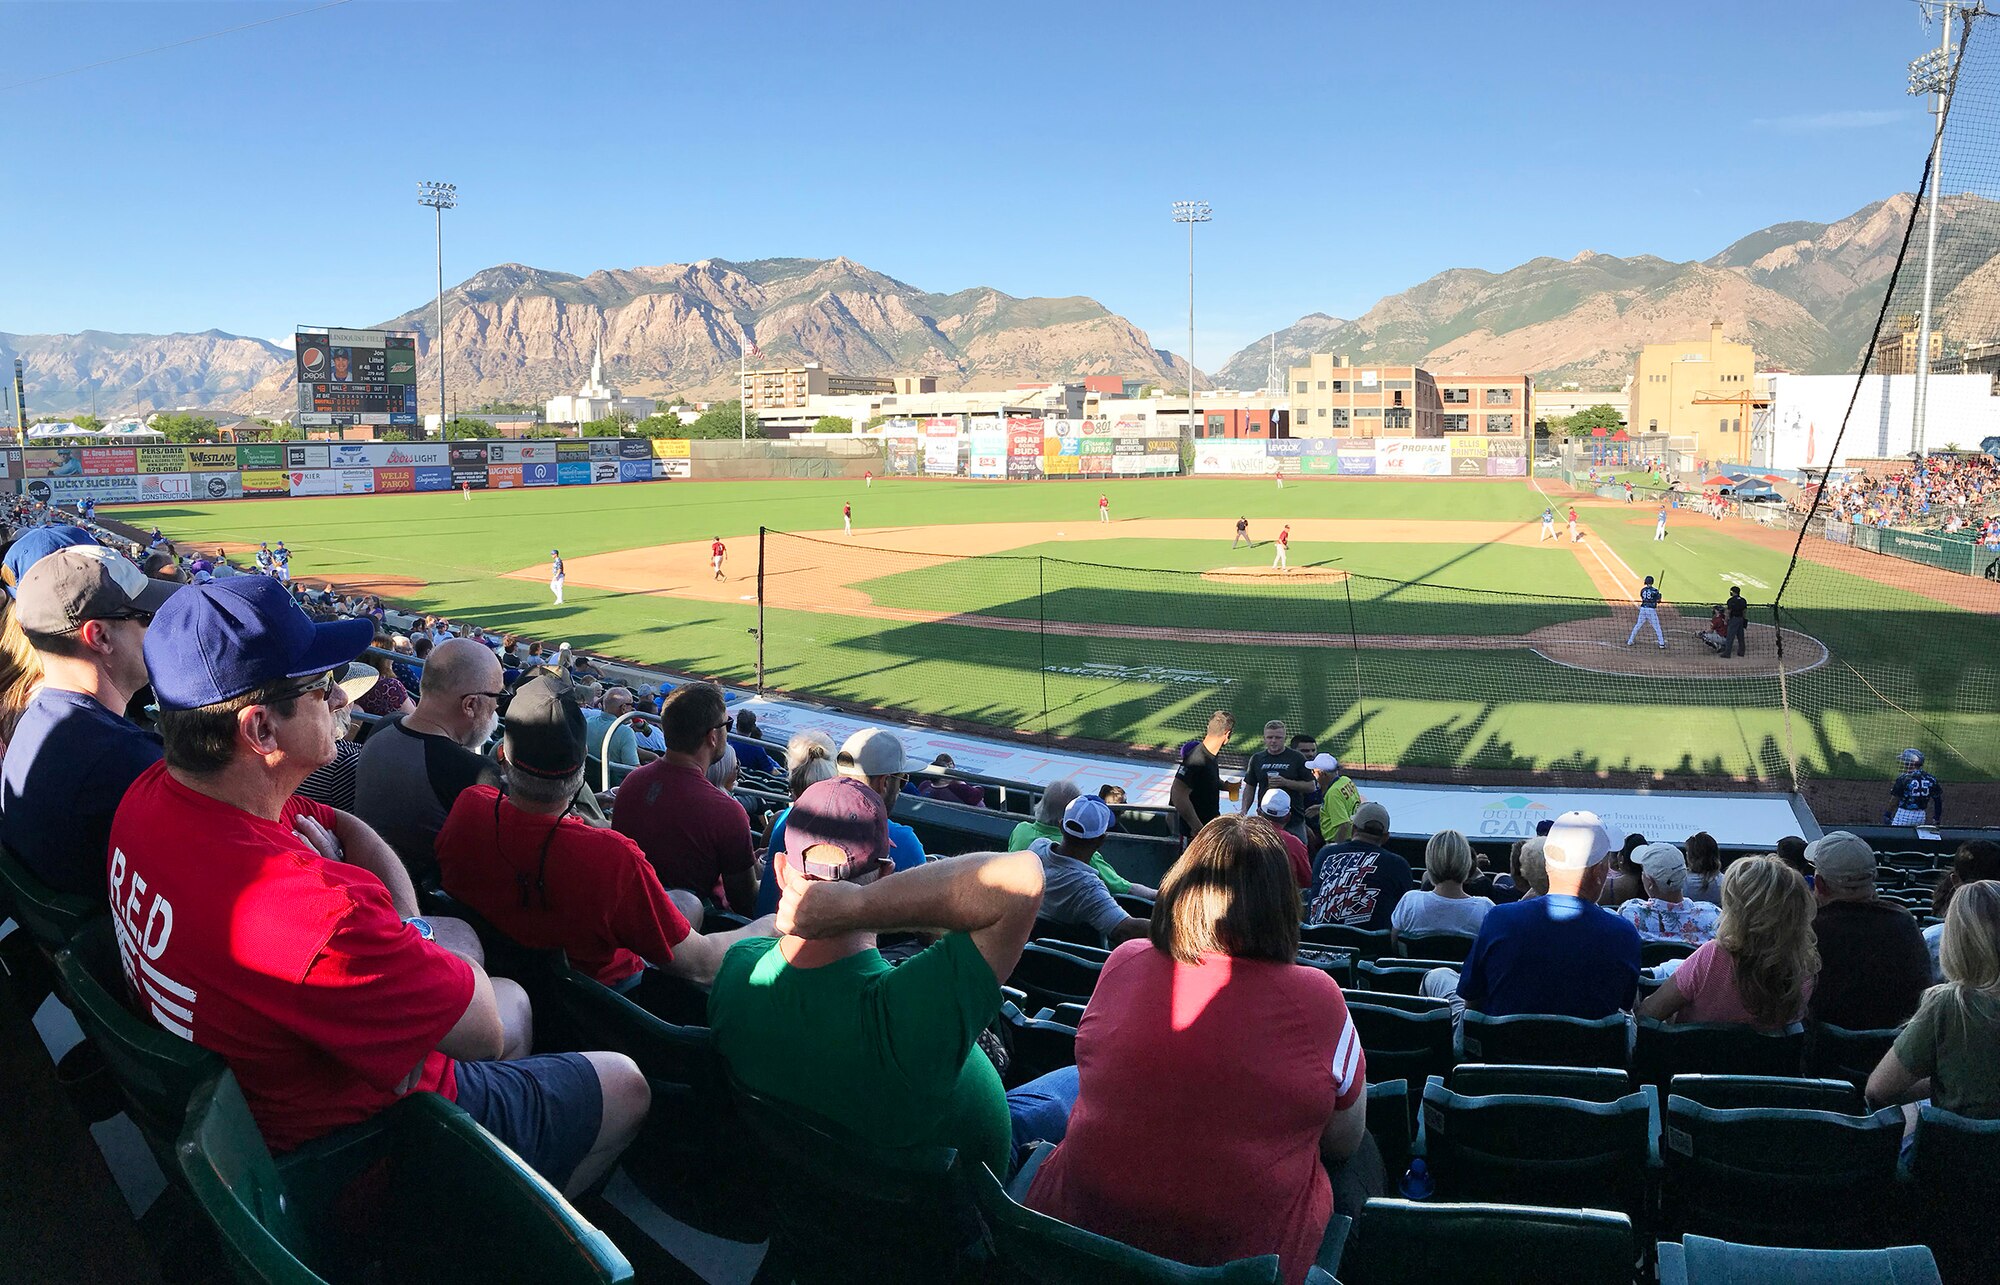 Fans at Military Appreciation Night with the Ogden Raptors and Idaho Falls Chuckars Aug. 9, 2019, at Lindquist Field in Ogden, Utah. Each year, the Raptors and Top of Utah Military Affairs Committee offer tickets to military personnel and their families. (U.S. Air Force photo by David Perry)